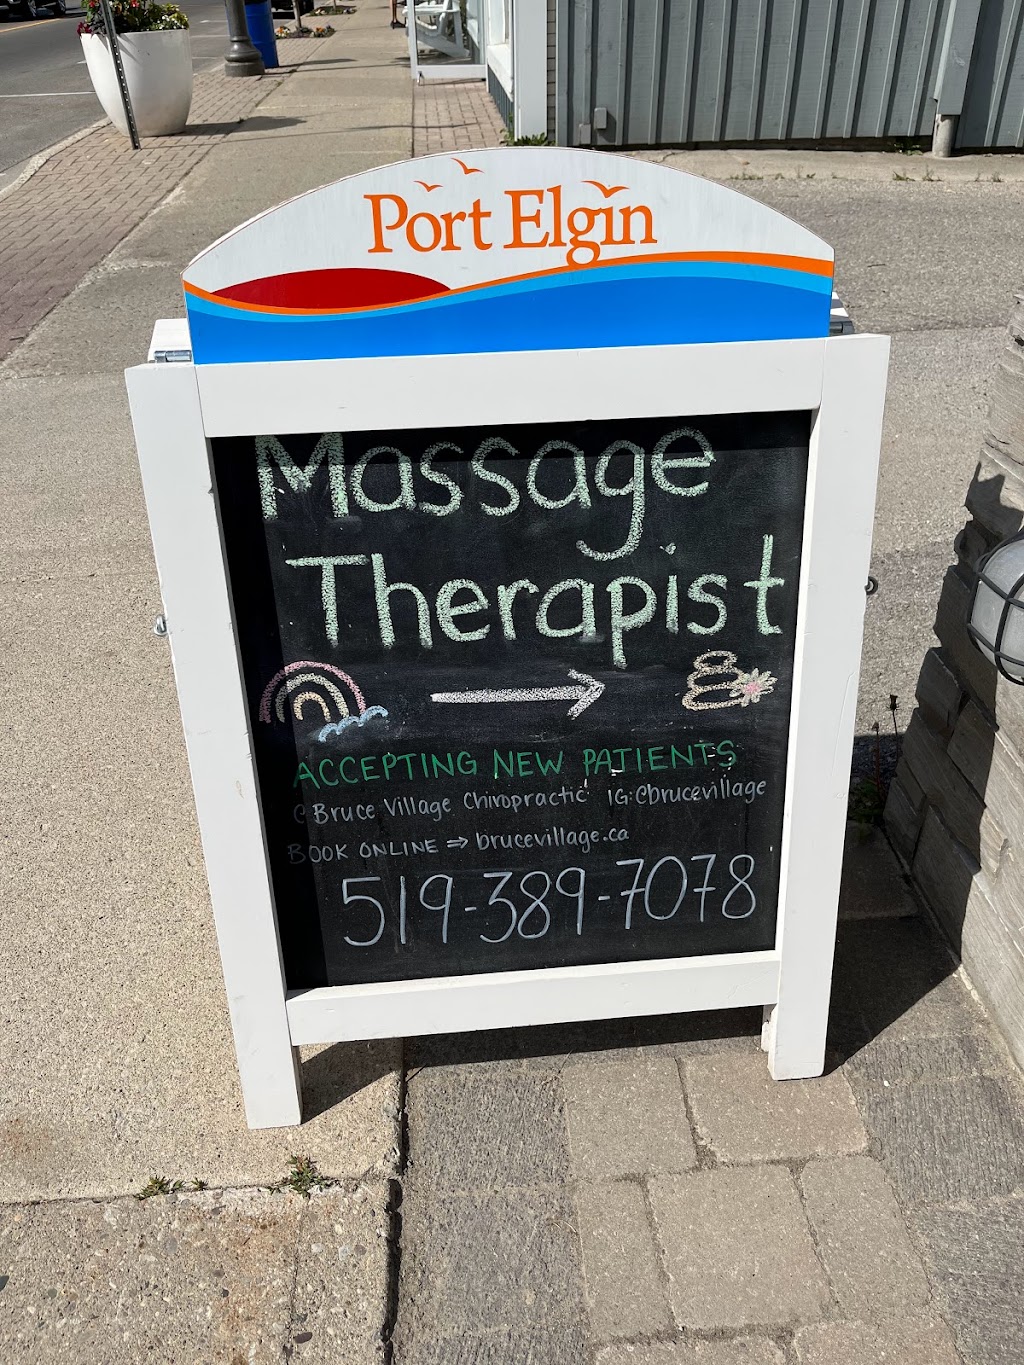 Bruce Village Chiropractic | 447 Goderich St, Port Elgin, ON N0H 2C4, Canada | Phone: (519) 389-7078